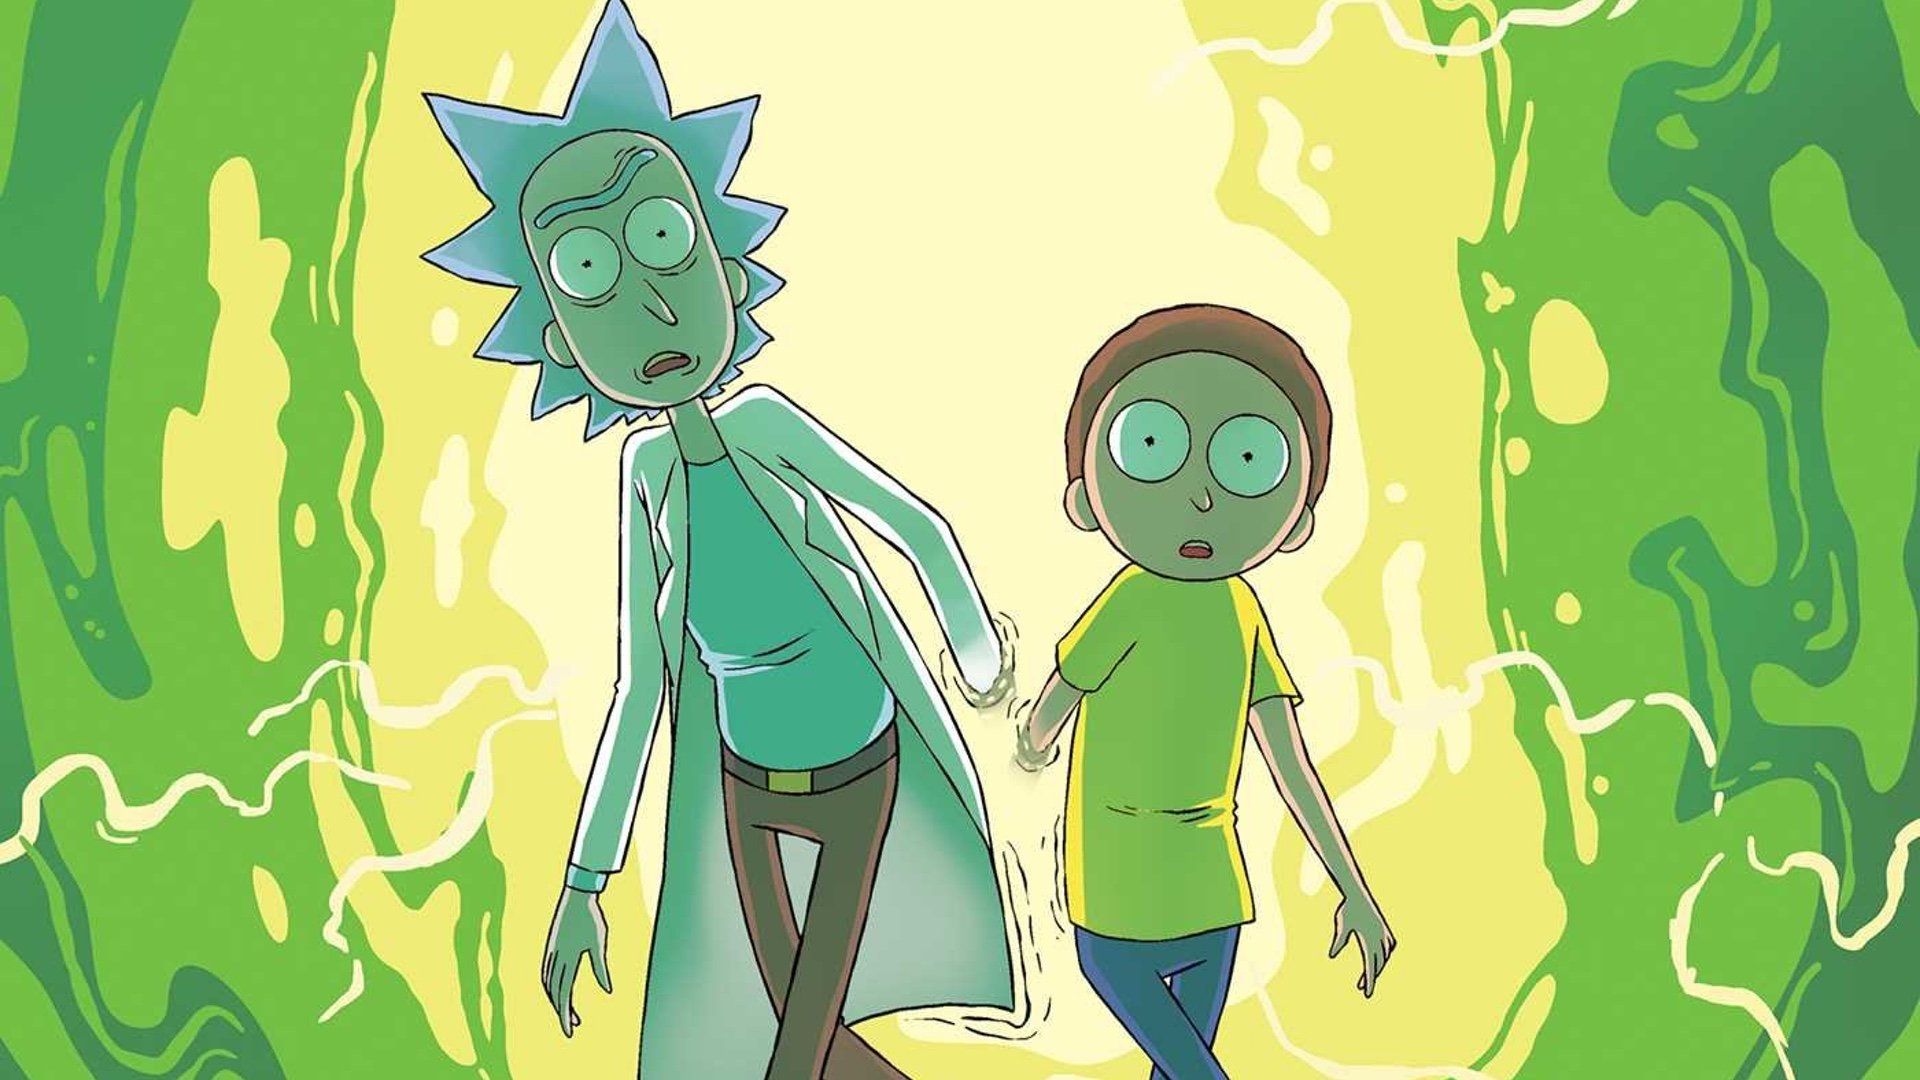 Rick and Morty Season 4 Episode 6 Release Date and Part 2 Schedule